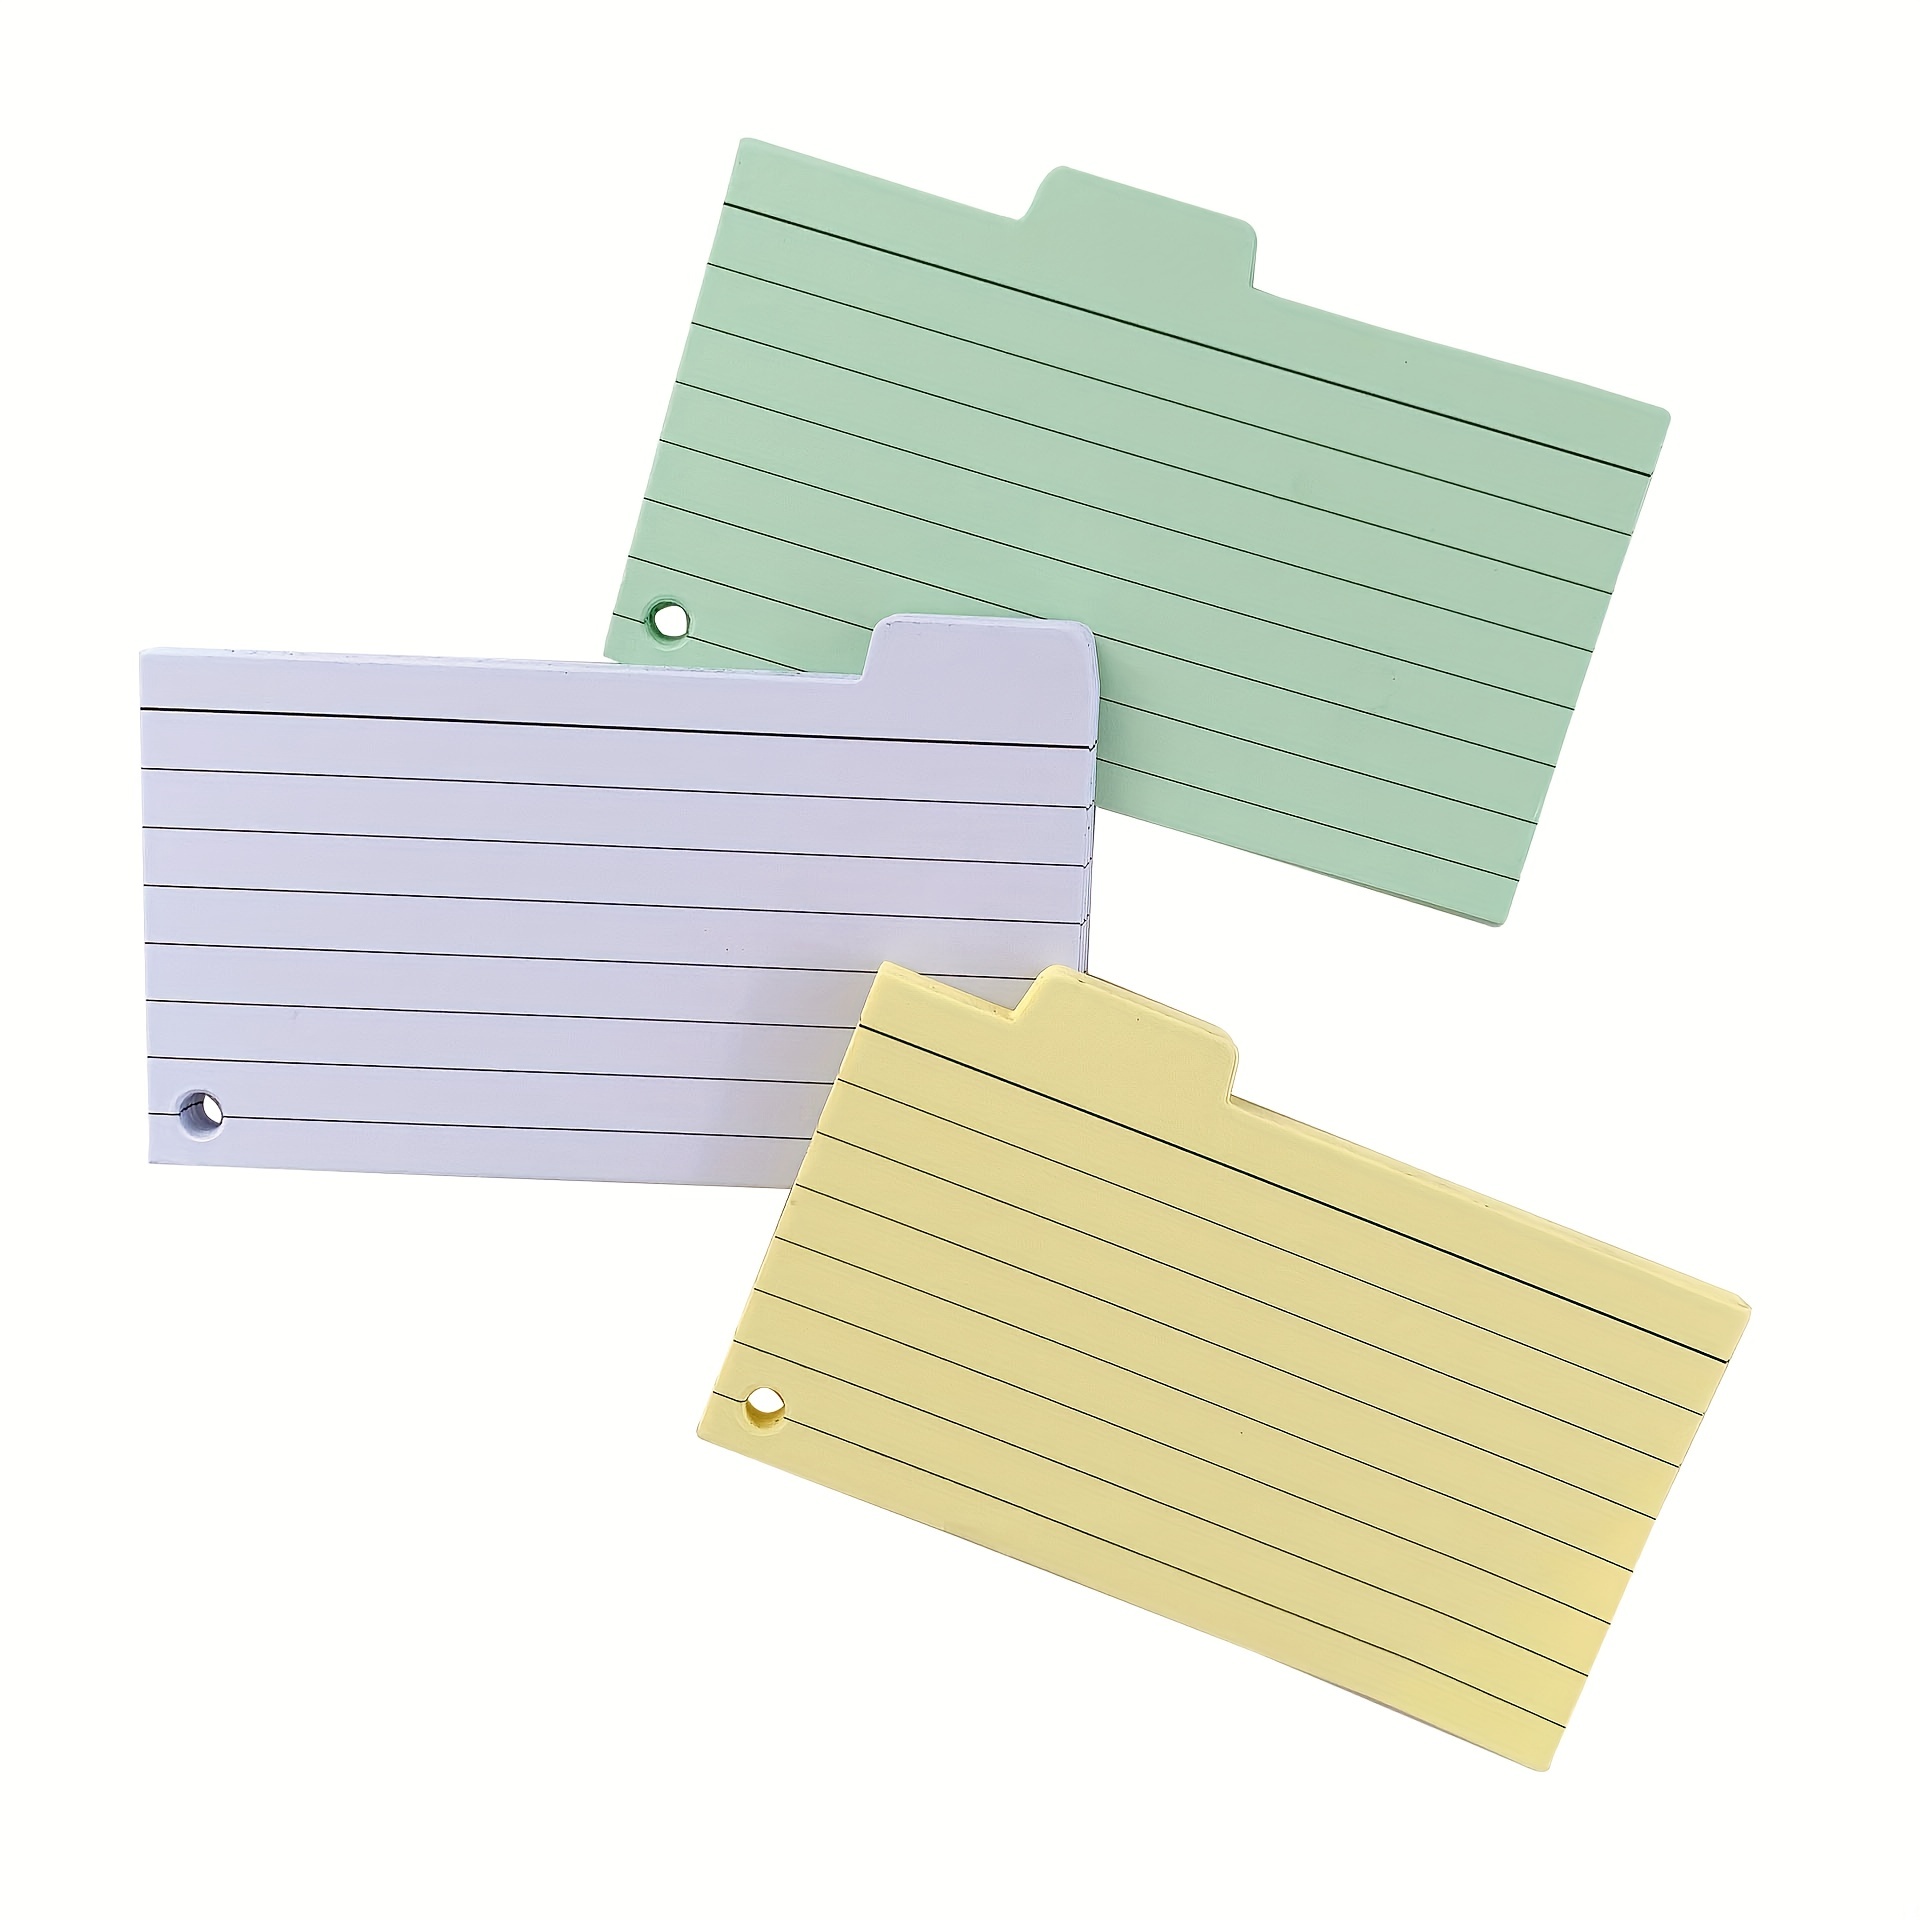 IMPRINT'S Ruled Flash Cards/Index Cards,White Card Stock,4 x 6 Inches,  300 Cards in This Pack